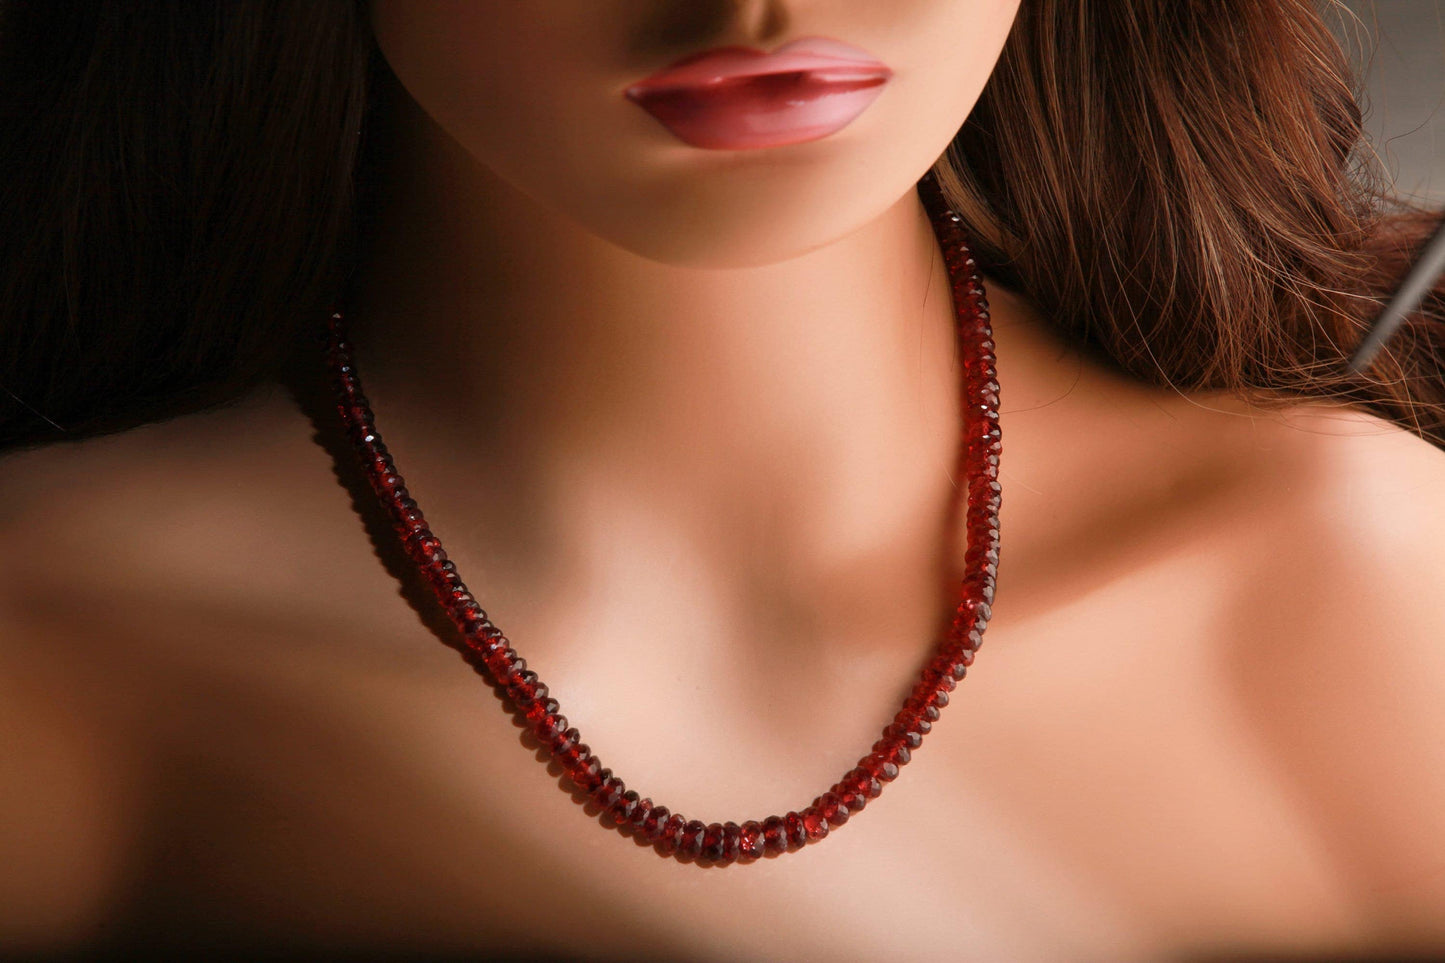 Genuine Garnet large AAA Faceted Rondelle Graduated 5-7mm 16&quot; Necklace with 3&quot; Rhodium Extension Chain, January Birthstone, precious gift .